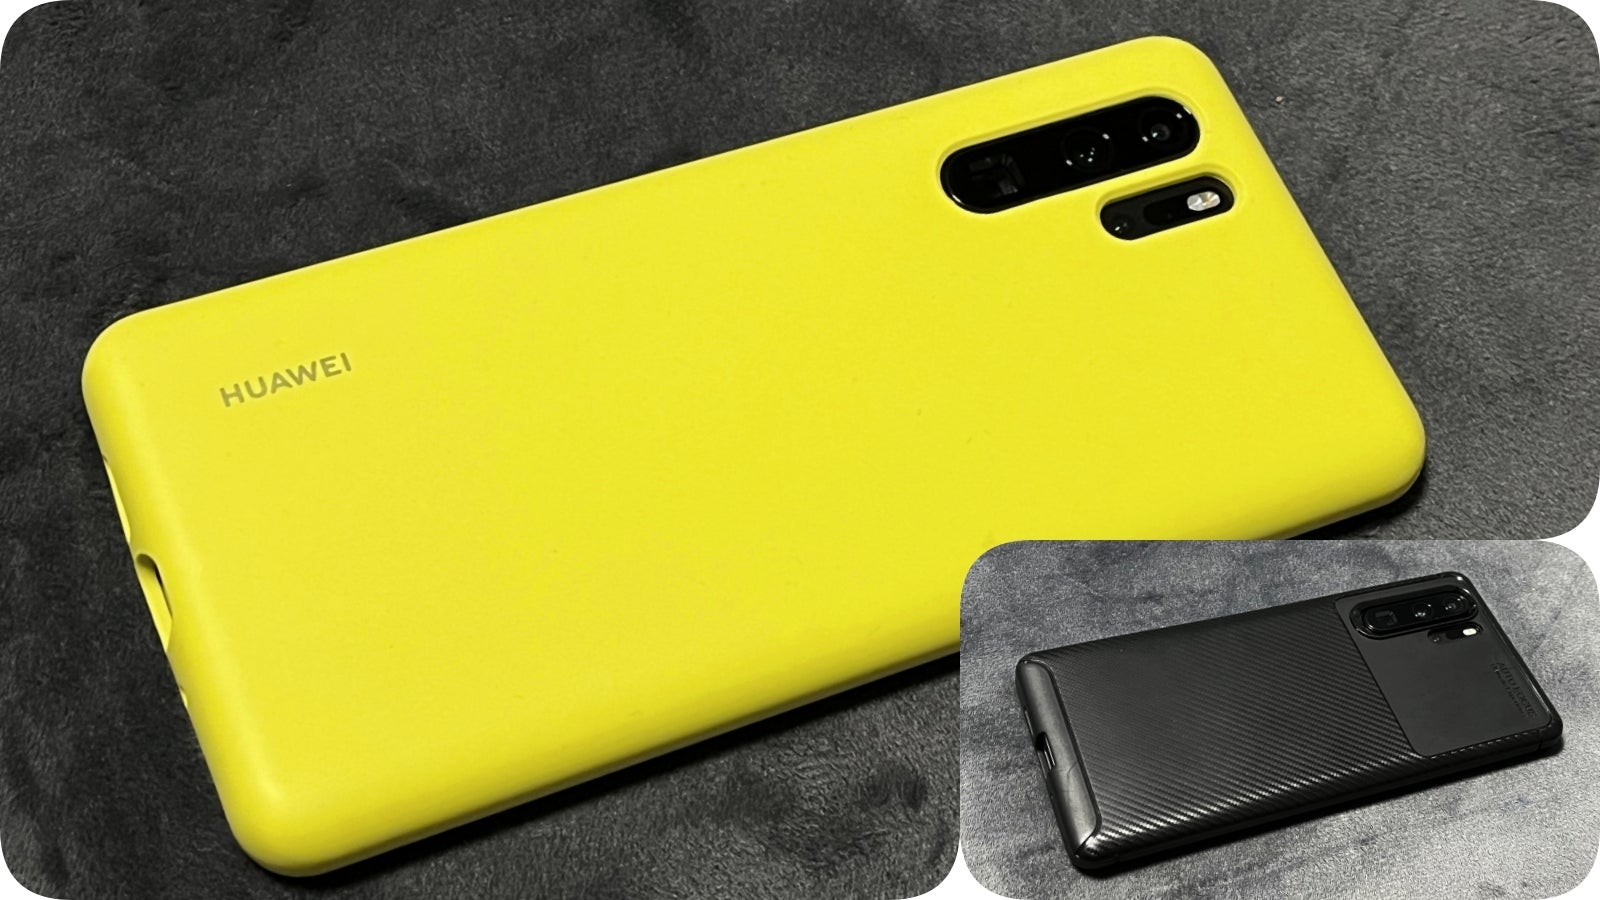 I guess my Huaweu P30 Pro from 2019 looks cool again. This case didn't cost $800. - The new yellow iPhone 14 is the worst purchase you could make right now (Apple's mind games)